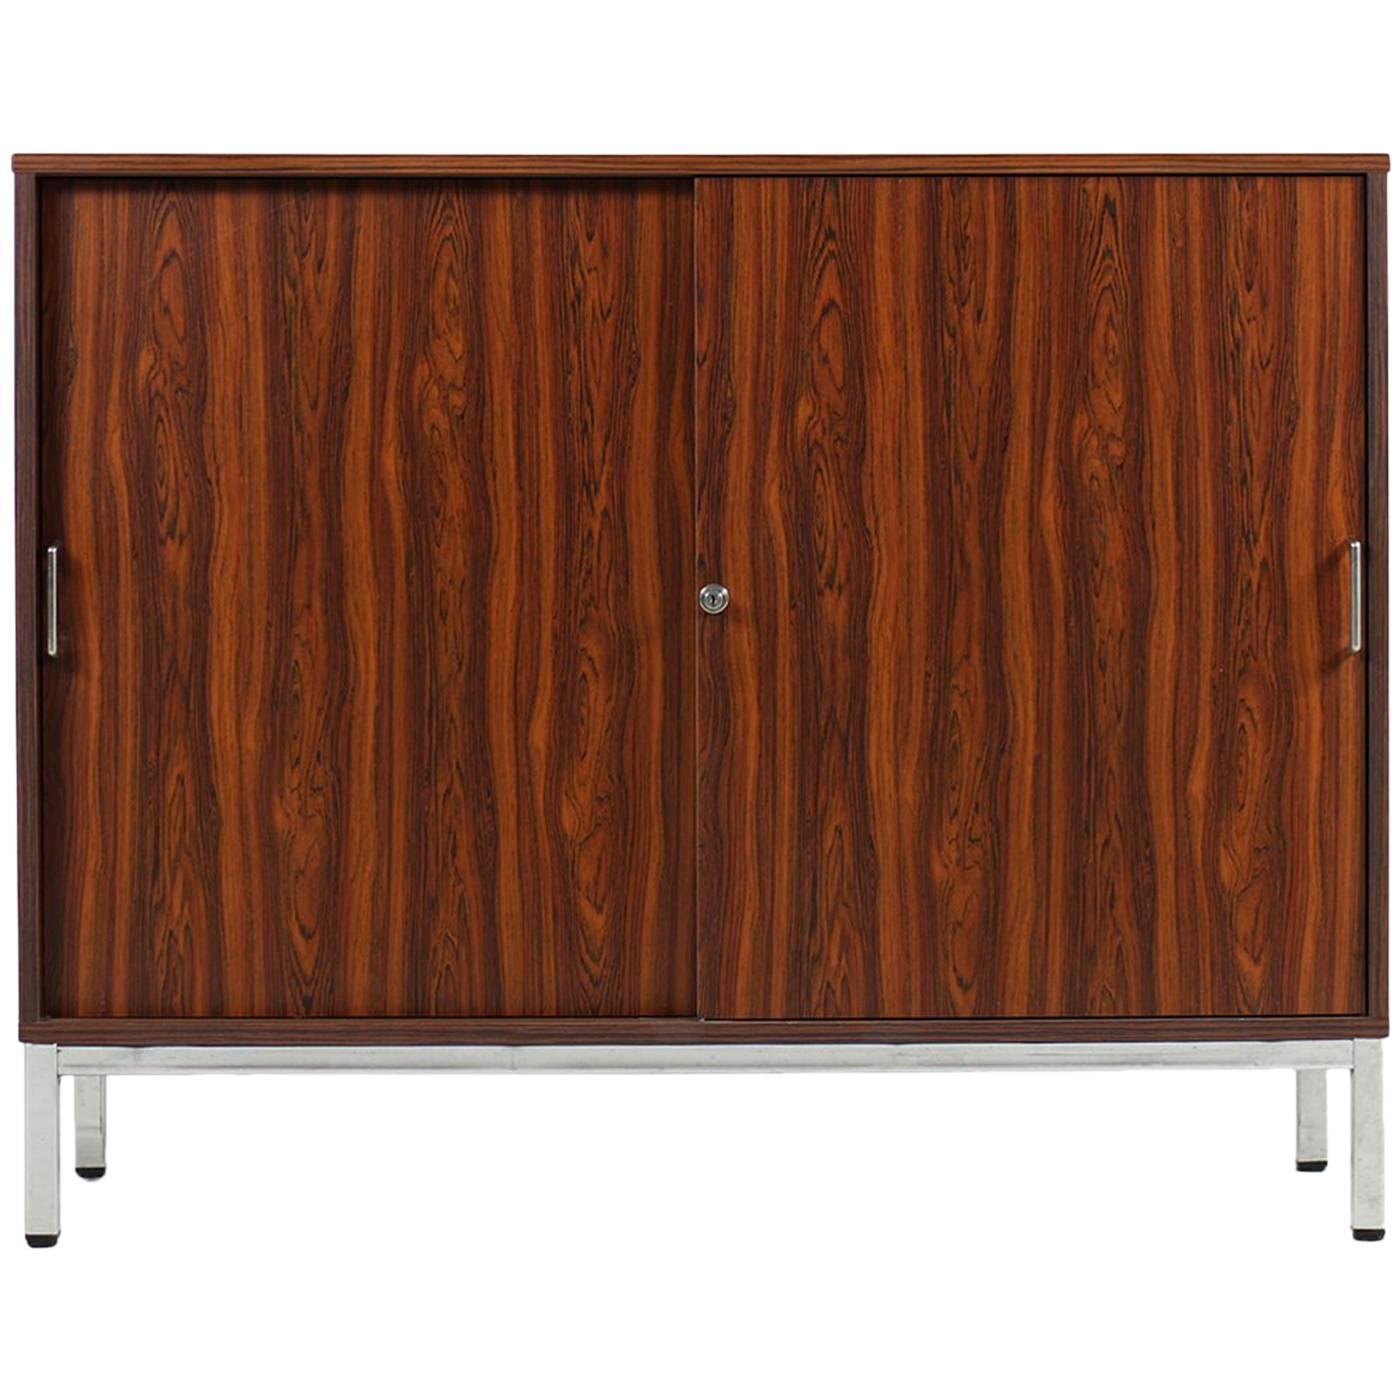 1970s Sideboard with Sliding Doors and Chrome Base Rosewood Metal Cabinet For Sale